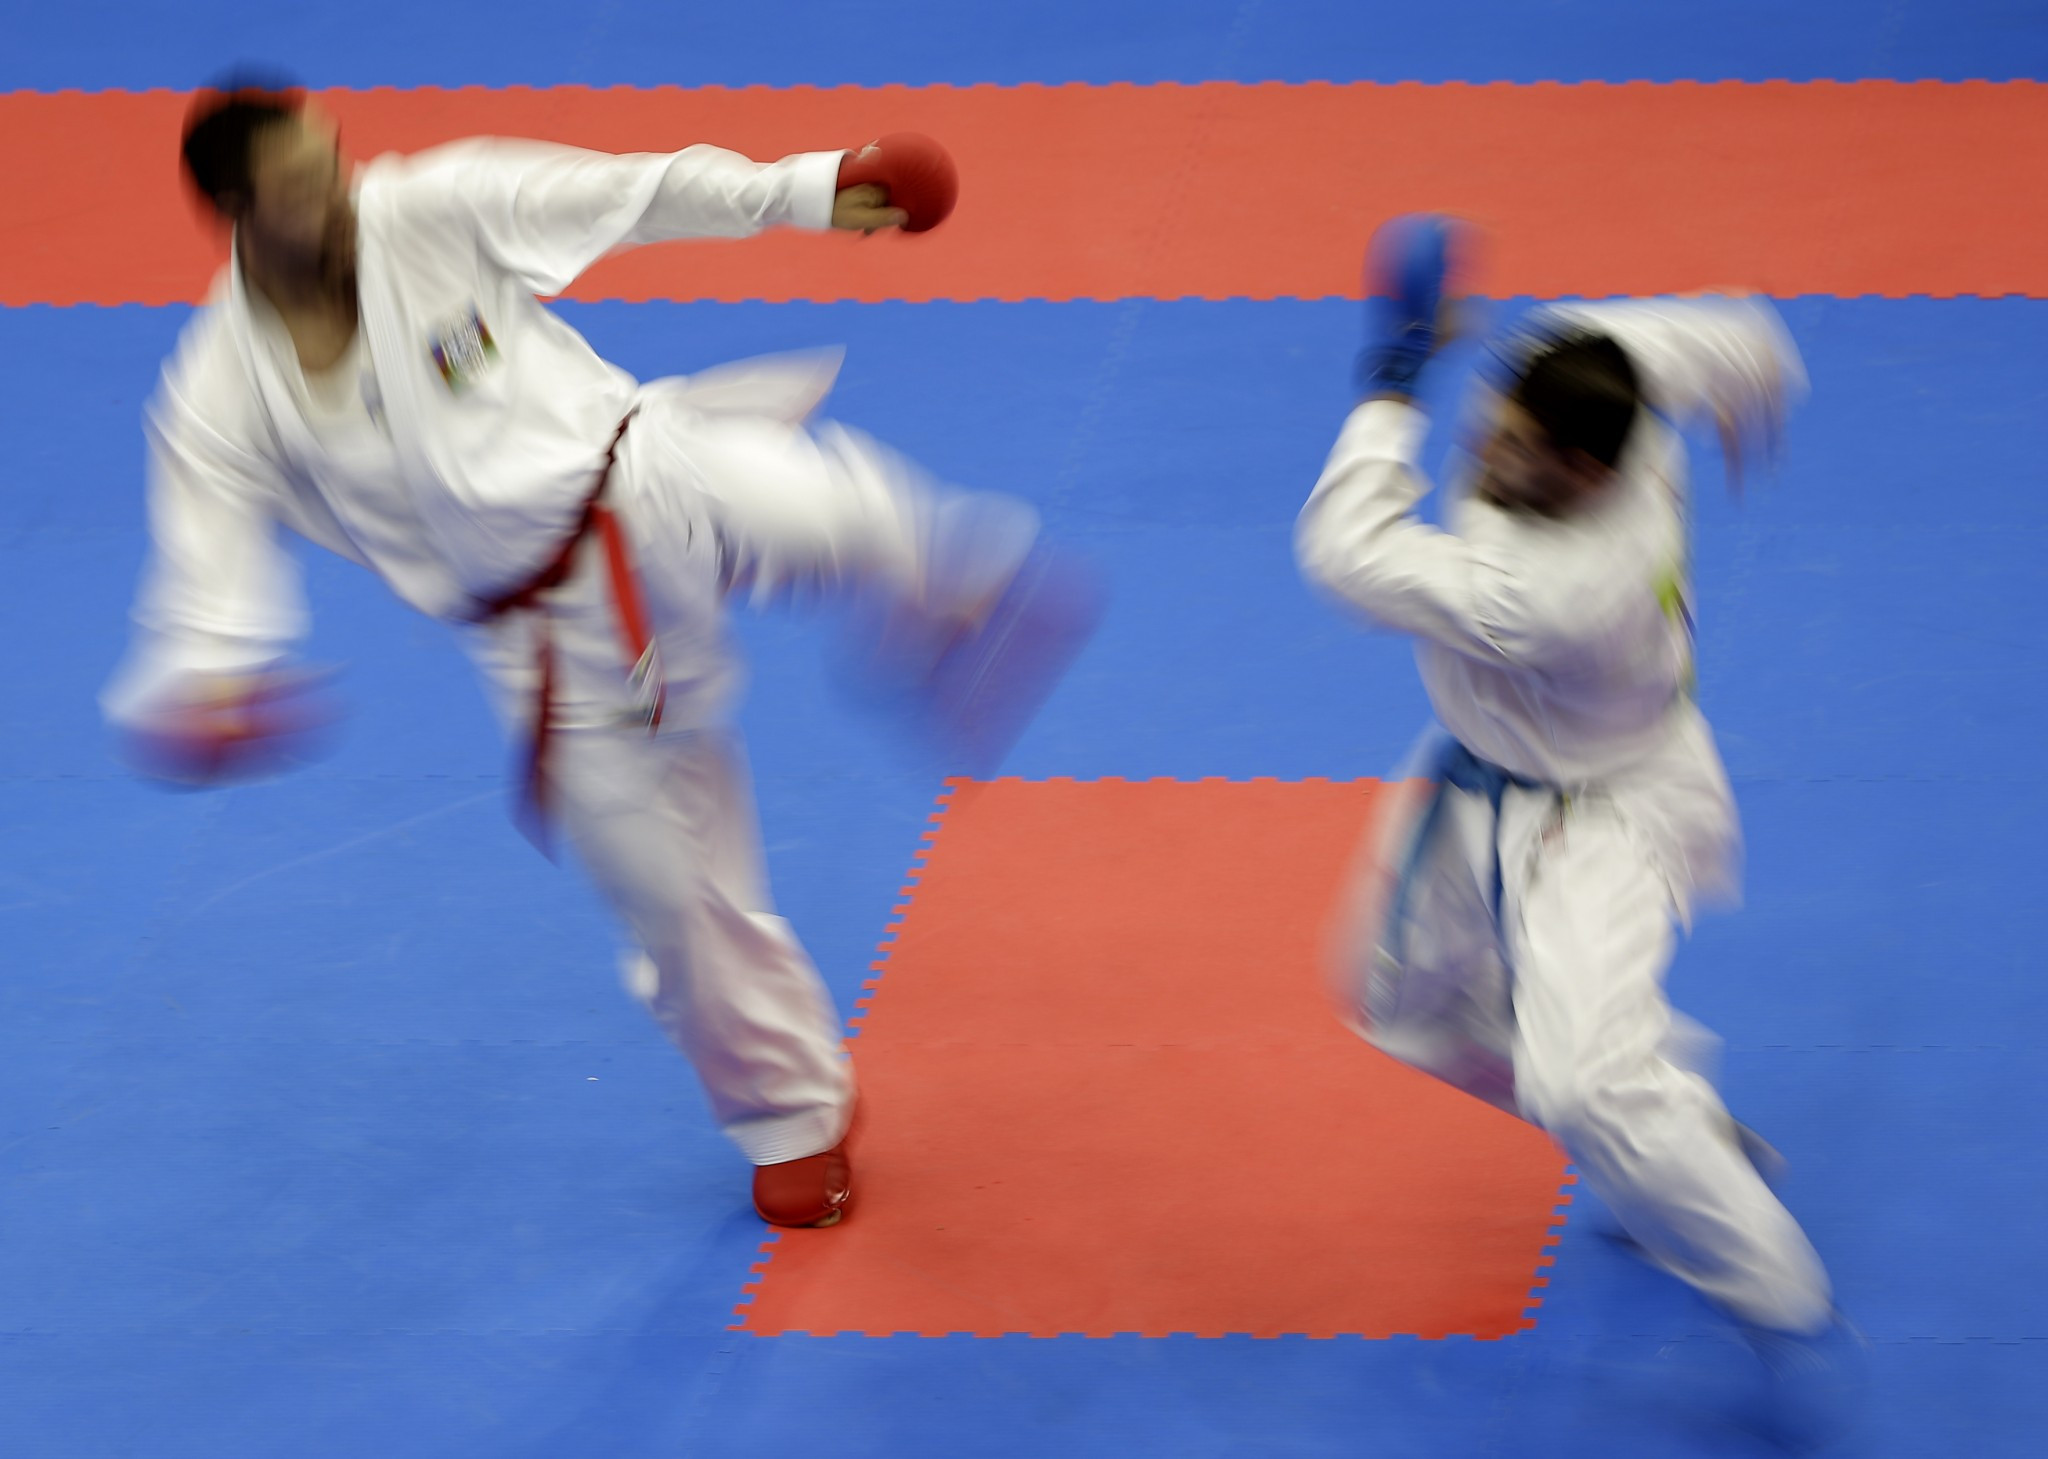 Karate will make its Olympic debut at Tokyo 2020 ©Getty Images